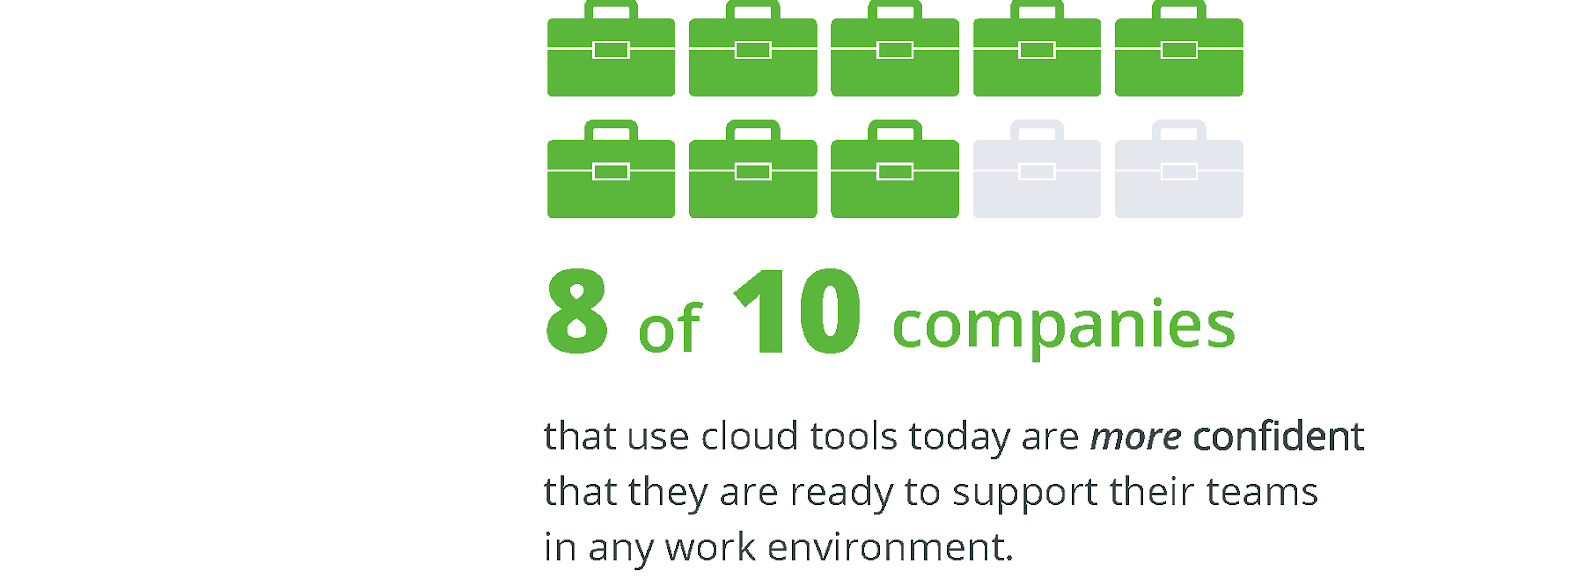 8 out of 10 companies that use cloud tools are more confident supporting remote work